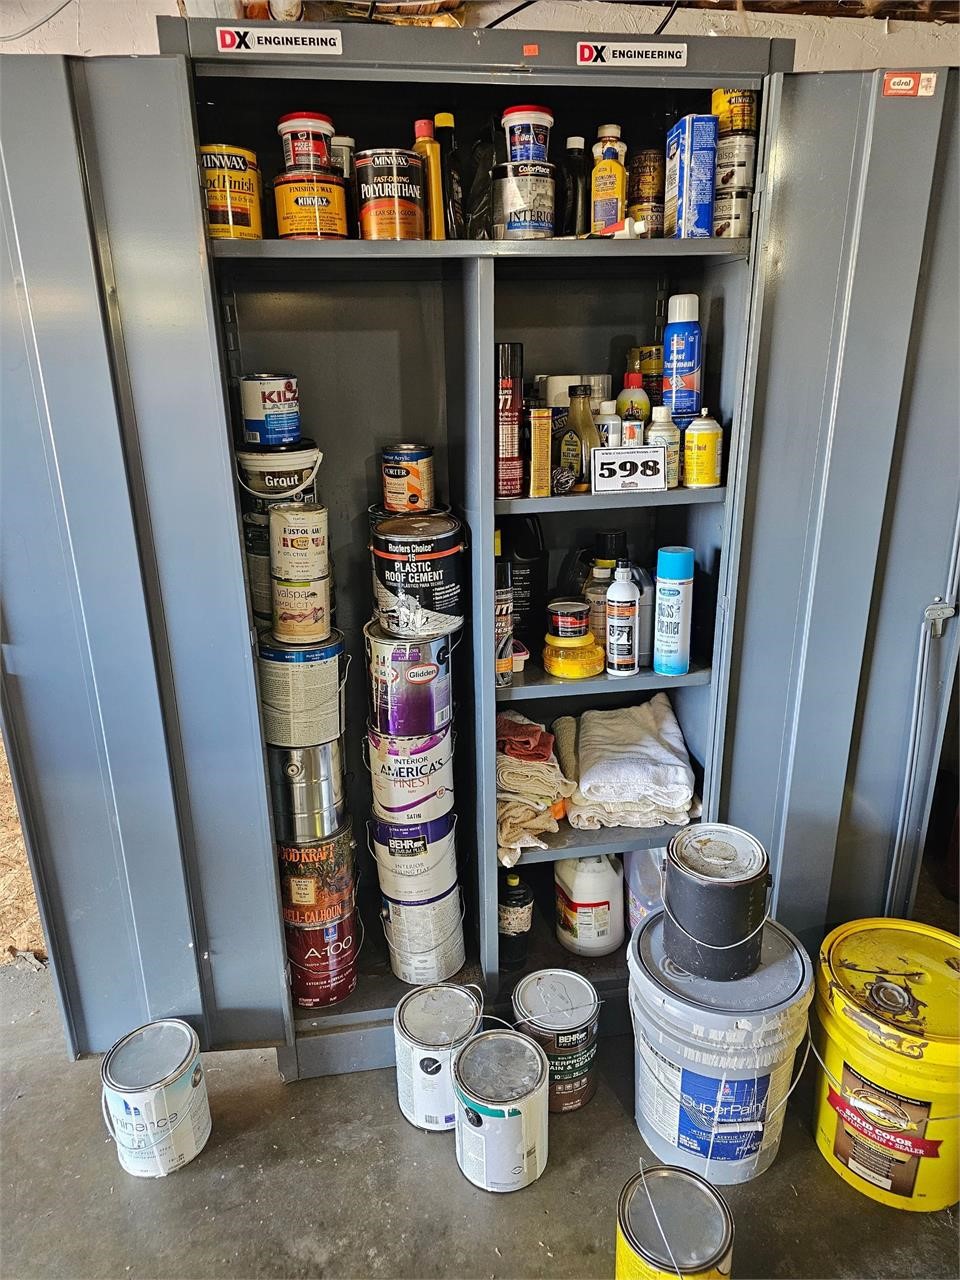 Contents of cabinet, shop chemicals - cabinet next